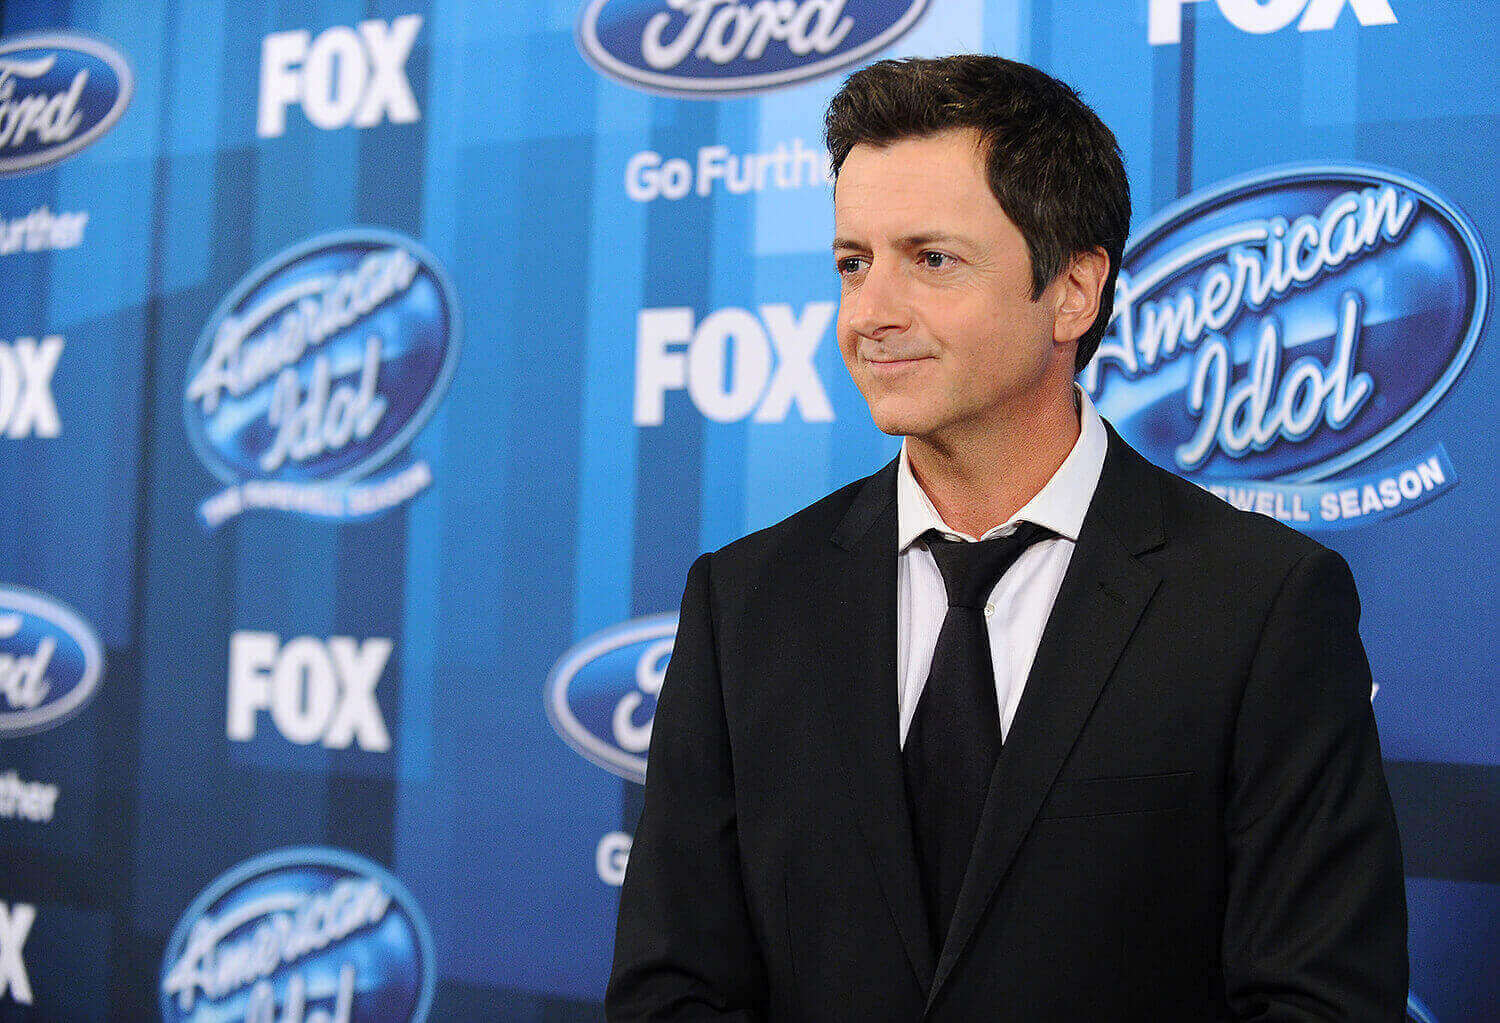 What Happened to Brian Dunkleman on ‘American Idol’?